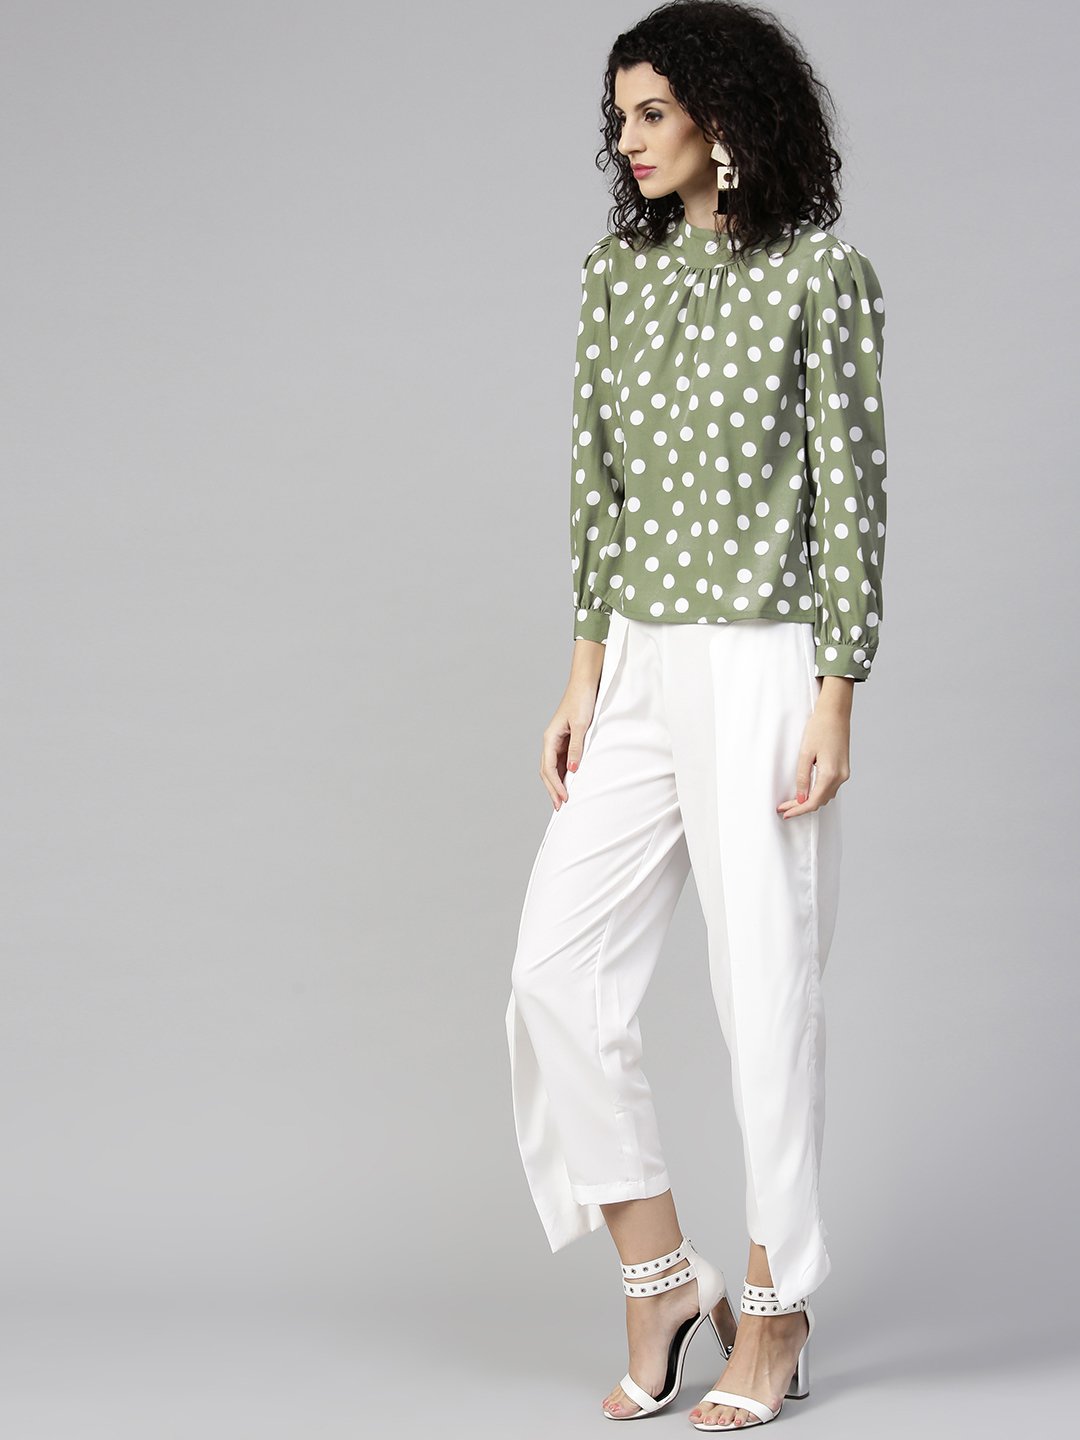 Women's Olive Green & White Printed Top With Trousers - Nayo Clothing